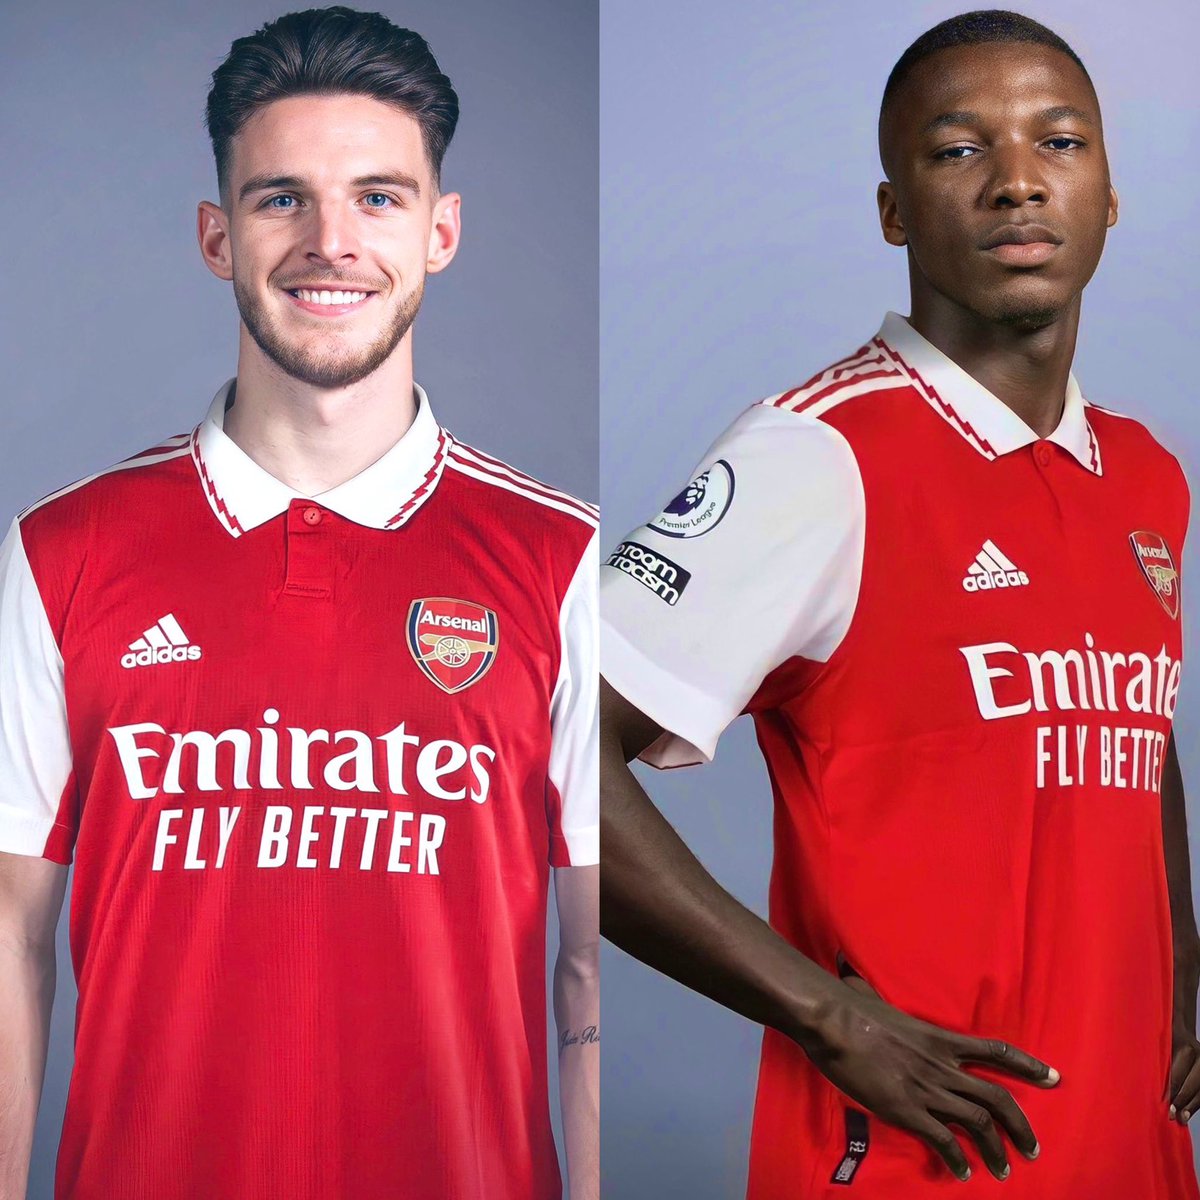 If Arsenal are to sign both Rice and Caicedo, will you be okay to let Xhaka leave?

🌚👀